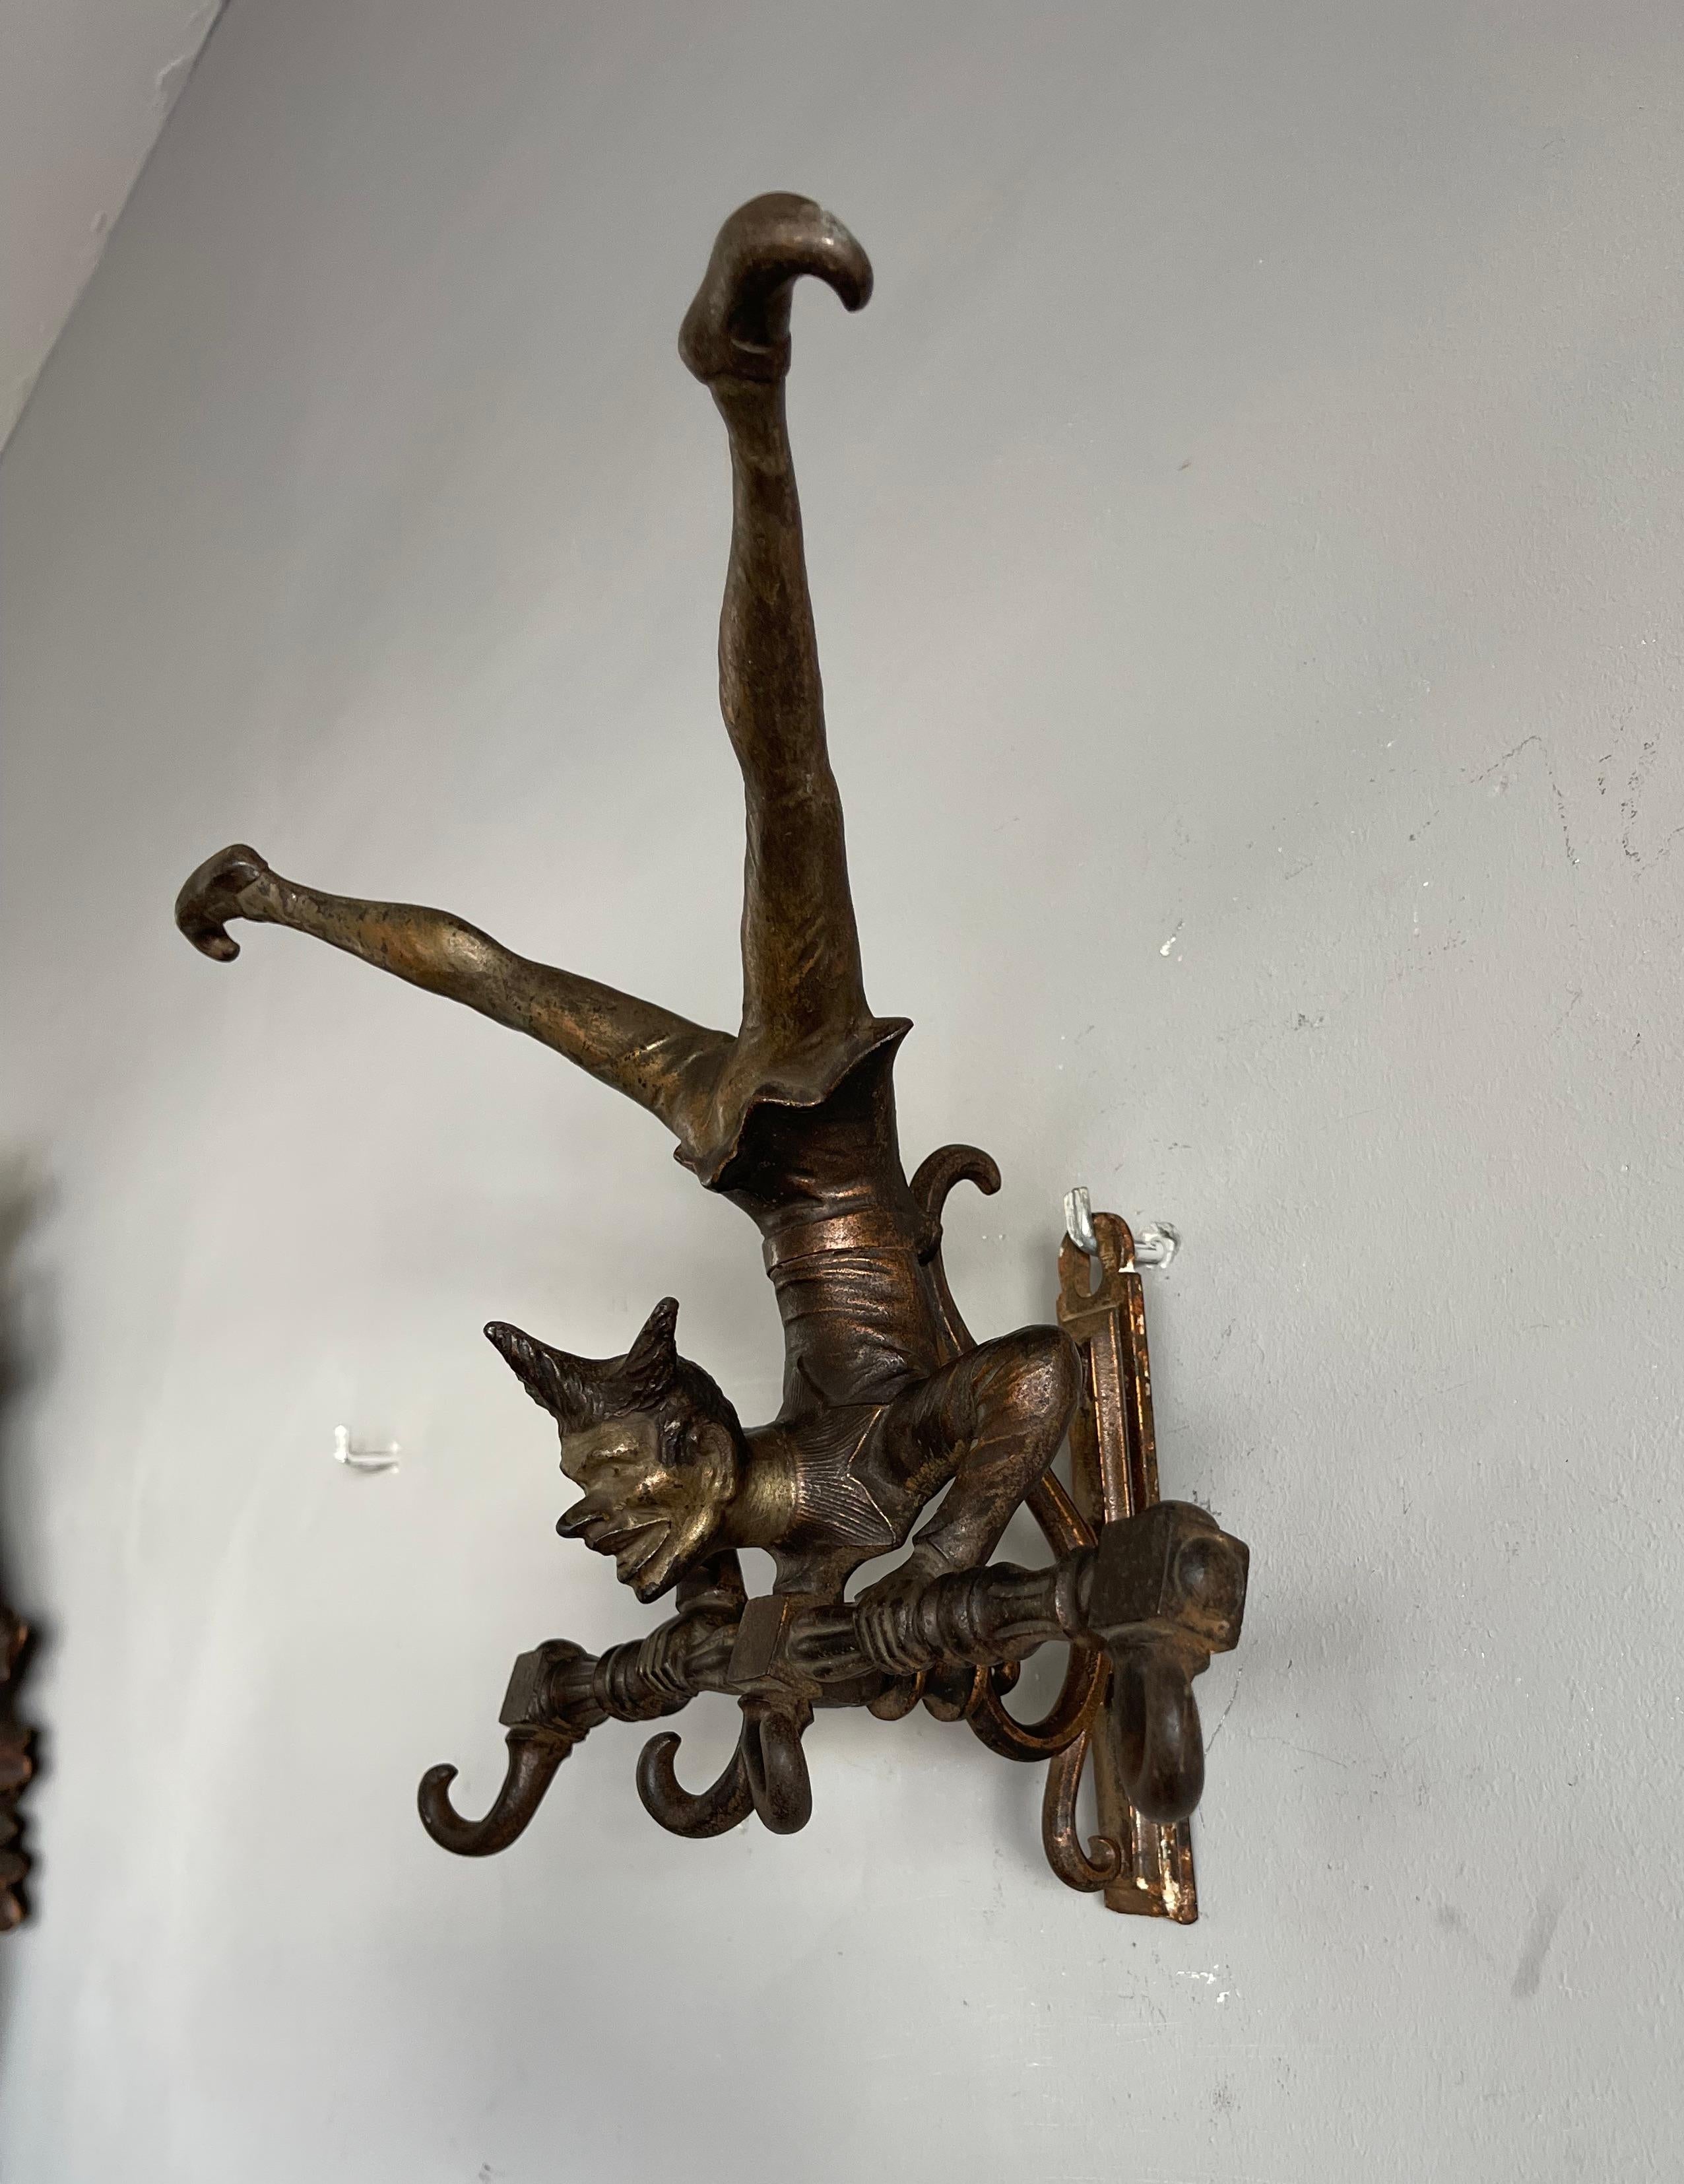 Arts and Crafts Antique Bronzed Iron Wall Key or Coat Rack w. Acrobatic Jester Figure, Great Fun